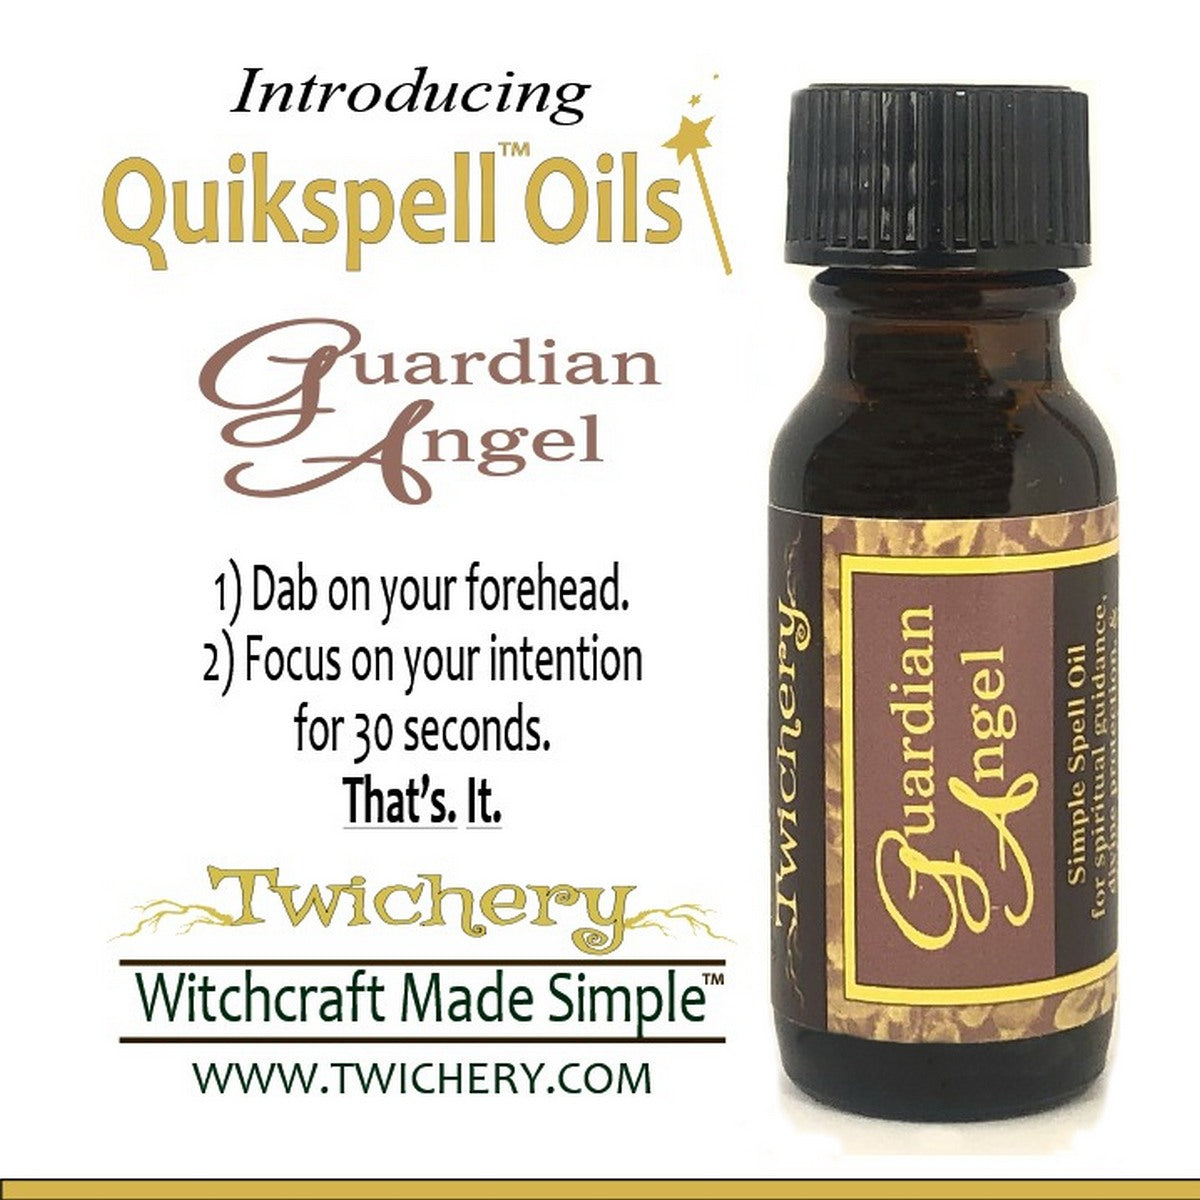 Twichery Guardian Angel Protection Quikspell Oil, Heavenly Protection, Hoodoo, Conjure, Voodoo, Wicca, Pagan, Witchcraft Made Simple